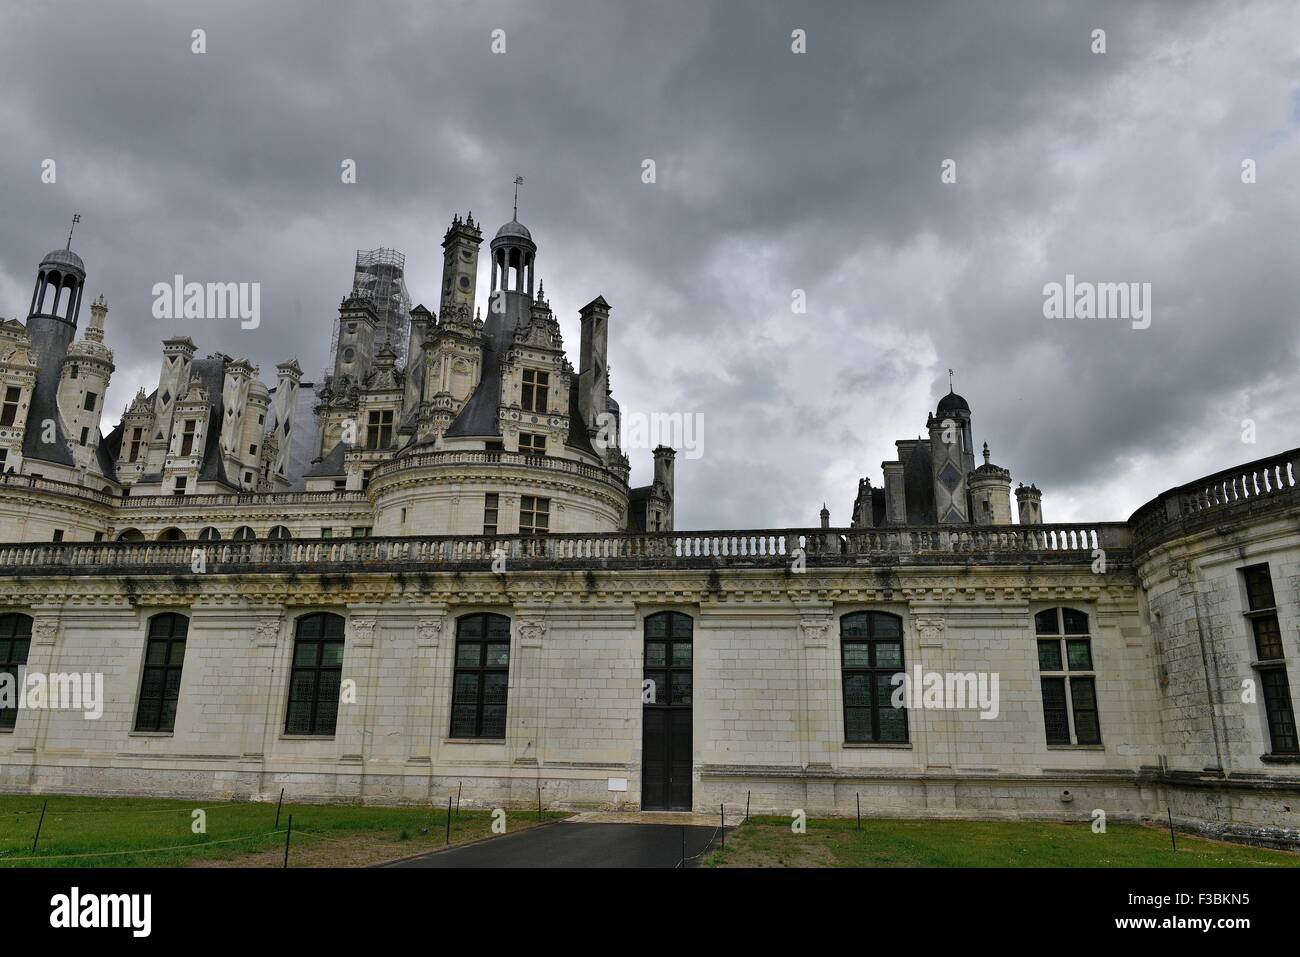 The royal Château de Chambord at Chambord, Loir-et-Cher, France, is one of the most recognizable châteaux in the world. UNESCO WORLE HERITAGE SITE Stock Photo